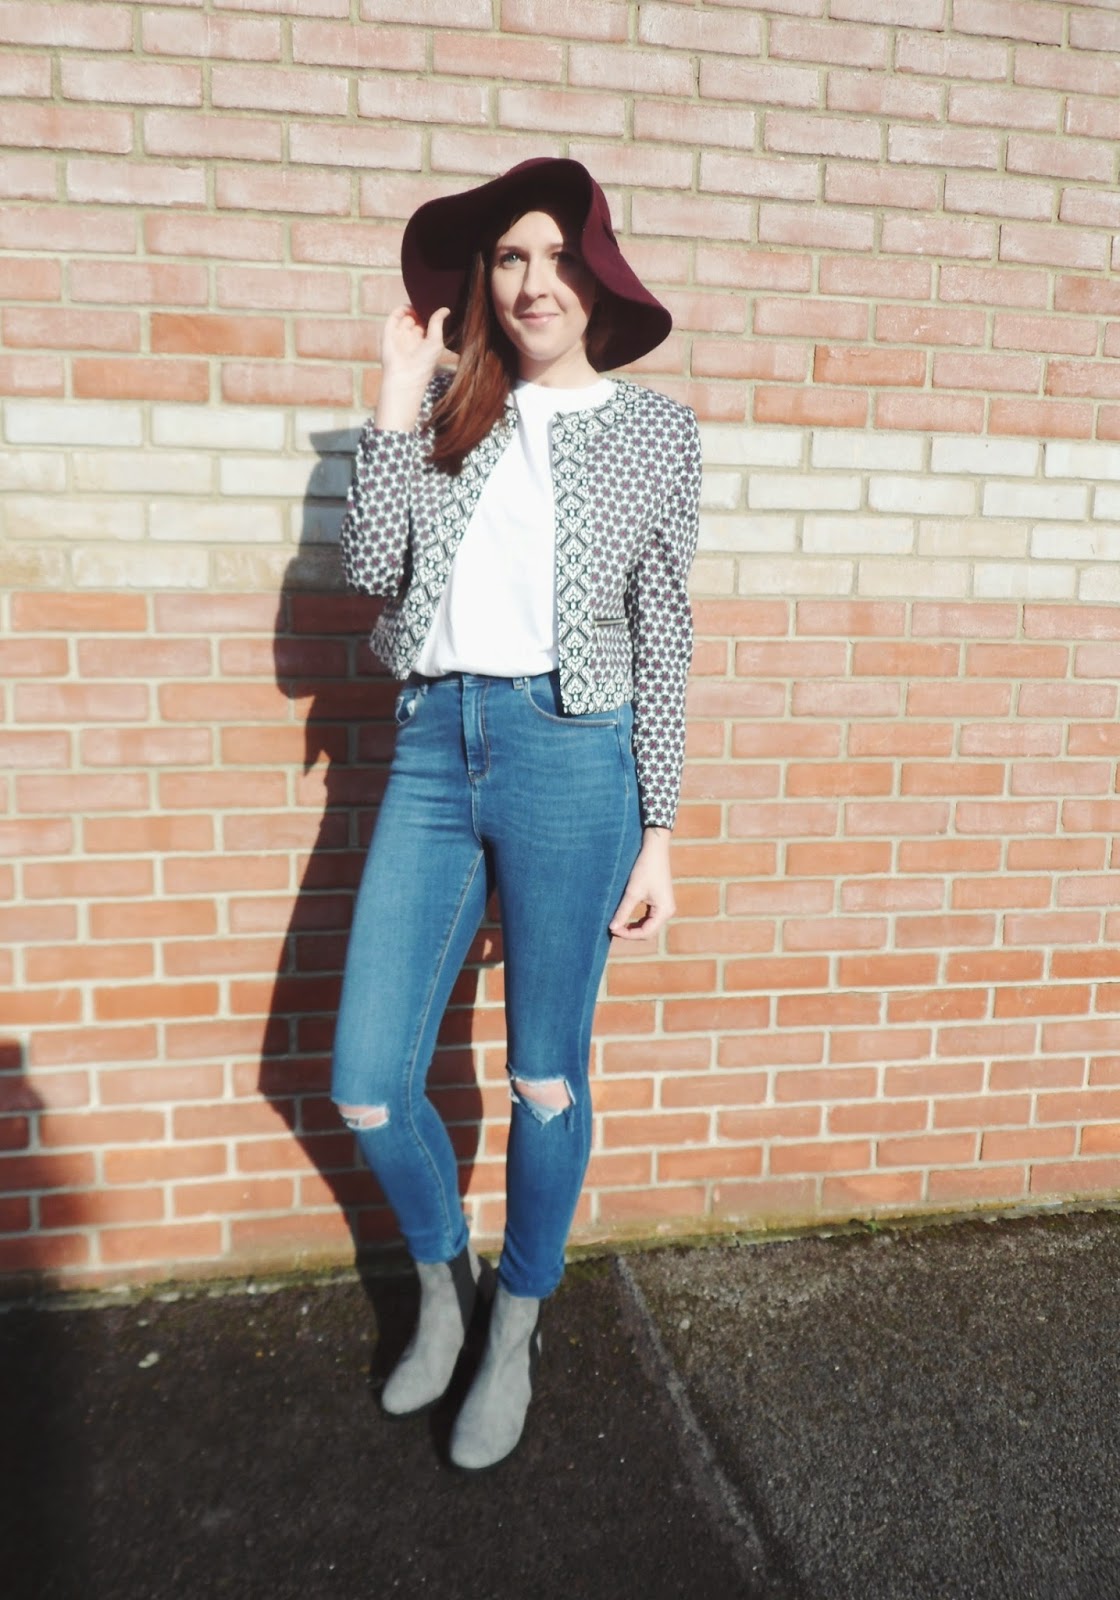 asseenonme, asos, primark, wiw, whatimwearing, whatibought, ootd, outfitoftheday,. lotd, lookoftheday, fbloggers, fashionbloggers, fblogger, seventiesfashion, theseventies, rippedjeans, boyfriendtee, cleatedheel, boots